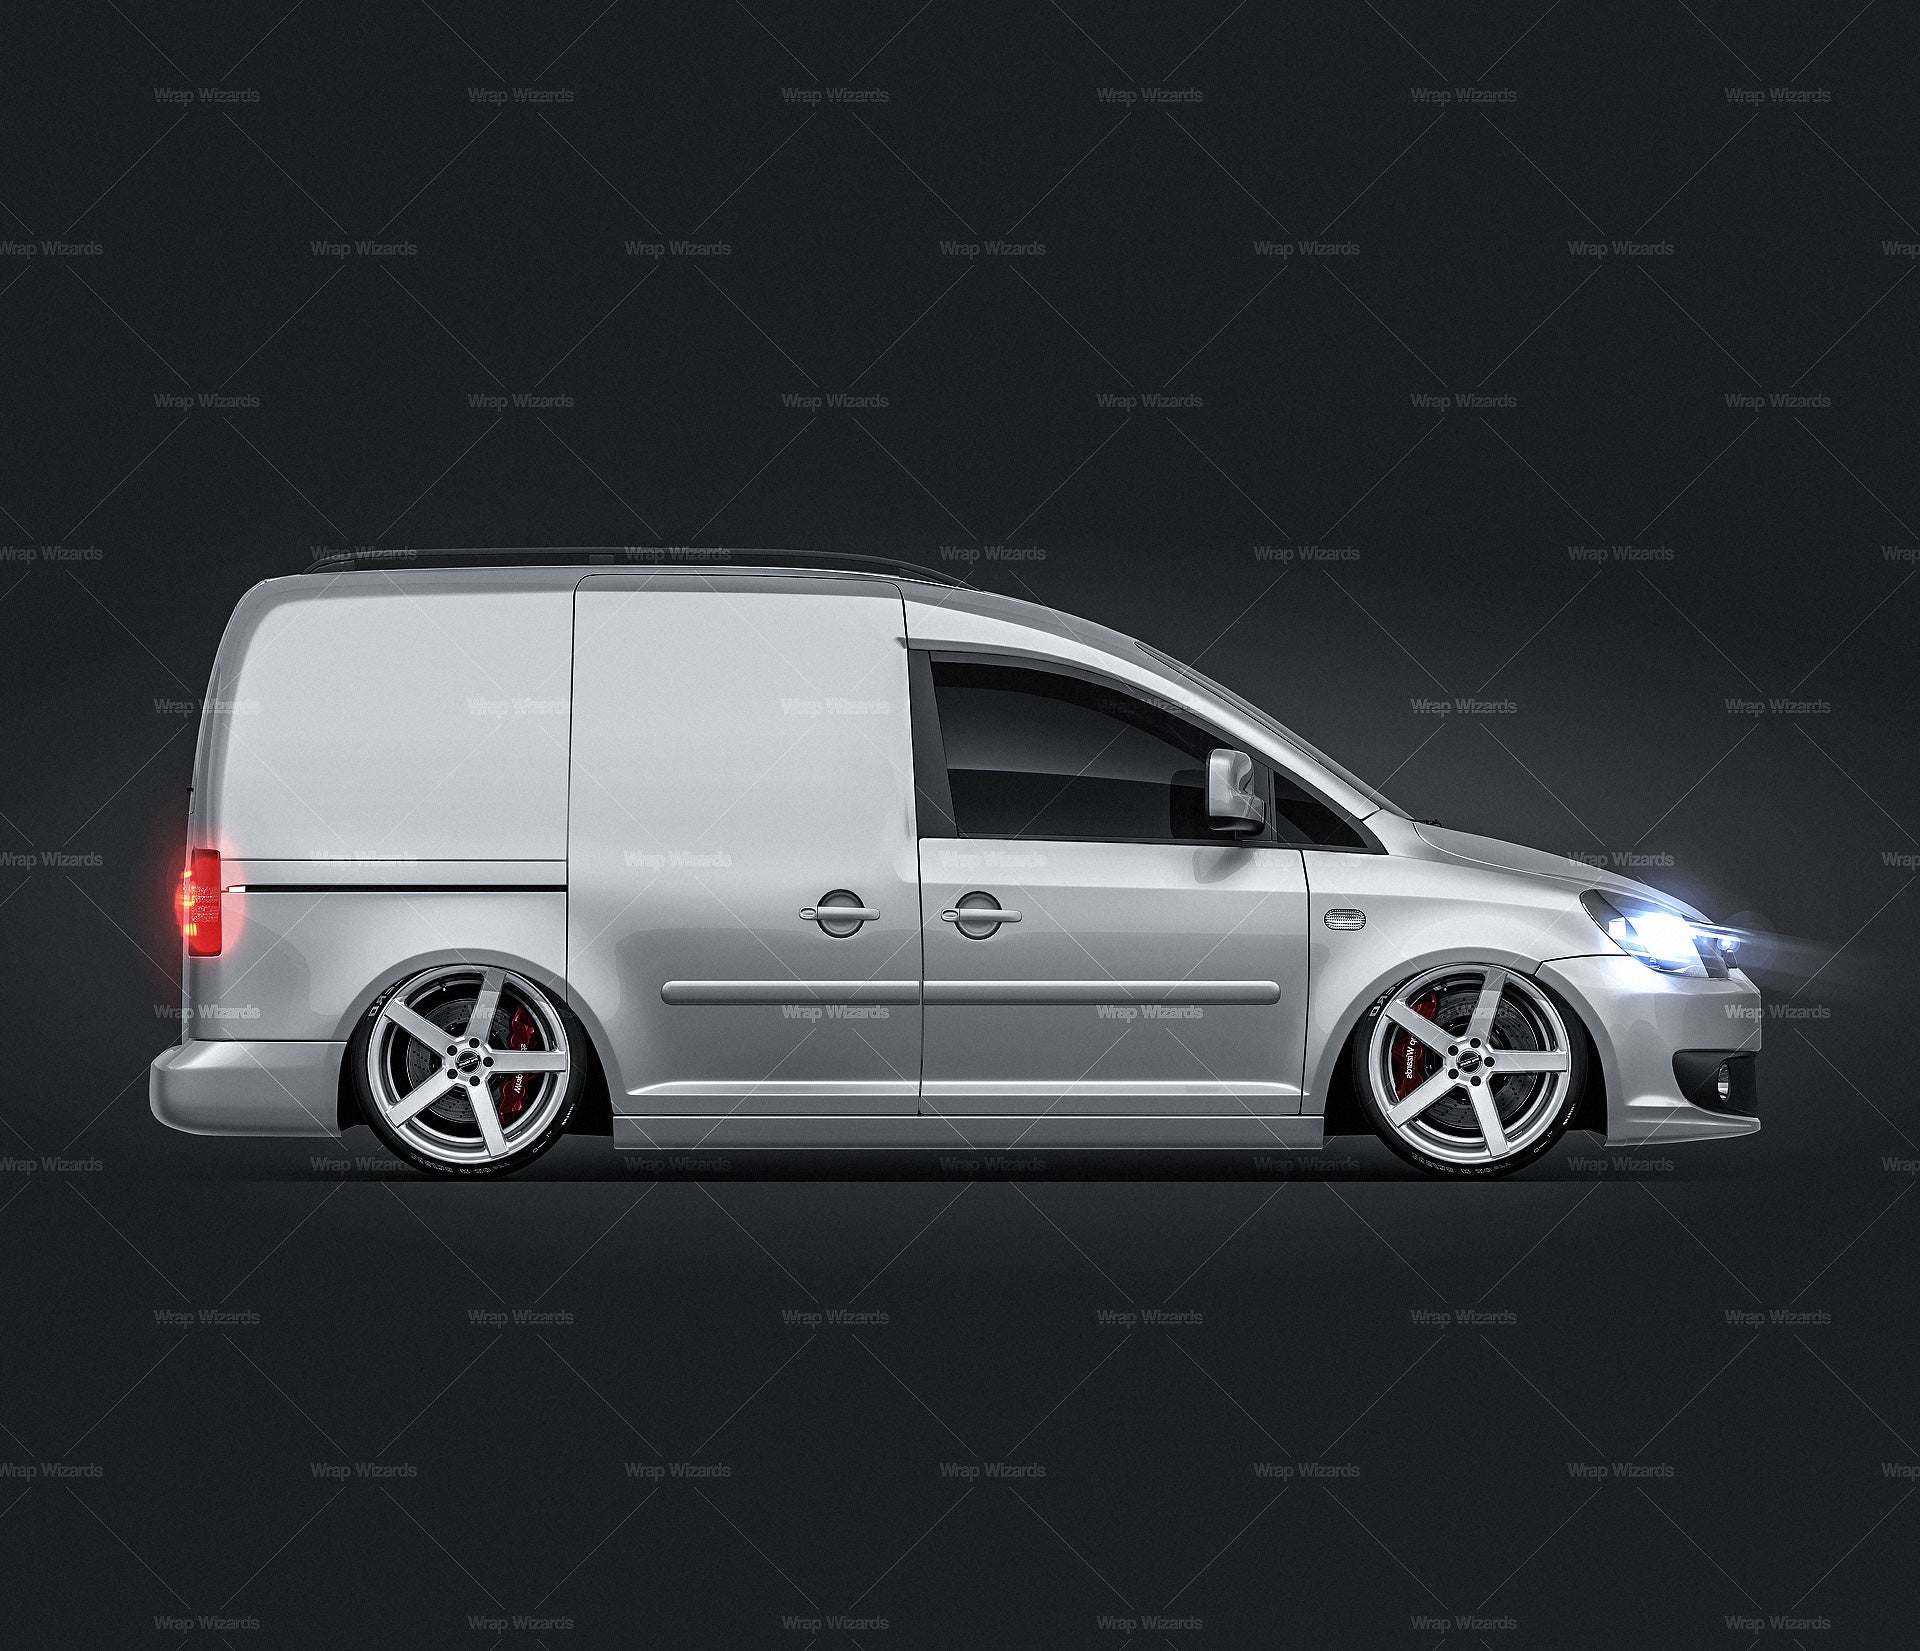 Volkswagen Caddy III Facelift (2011) without windows glossy finish - all sides car mockup template.psd